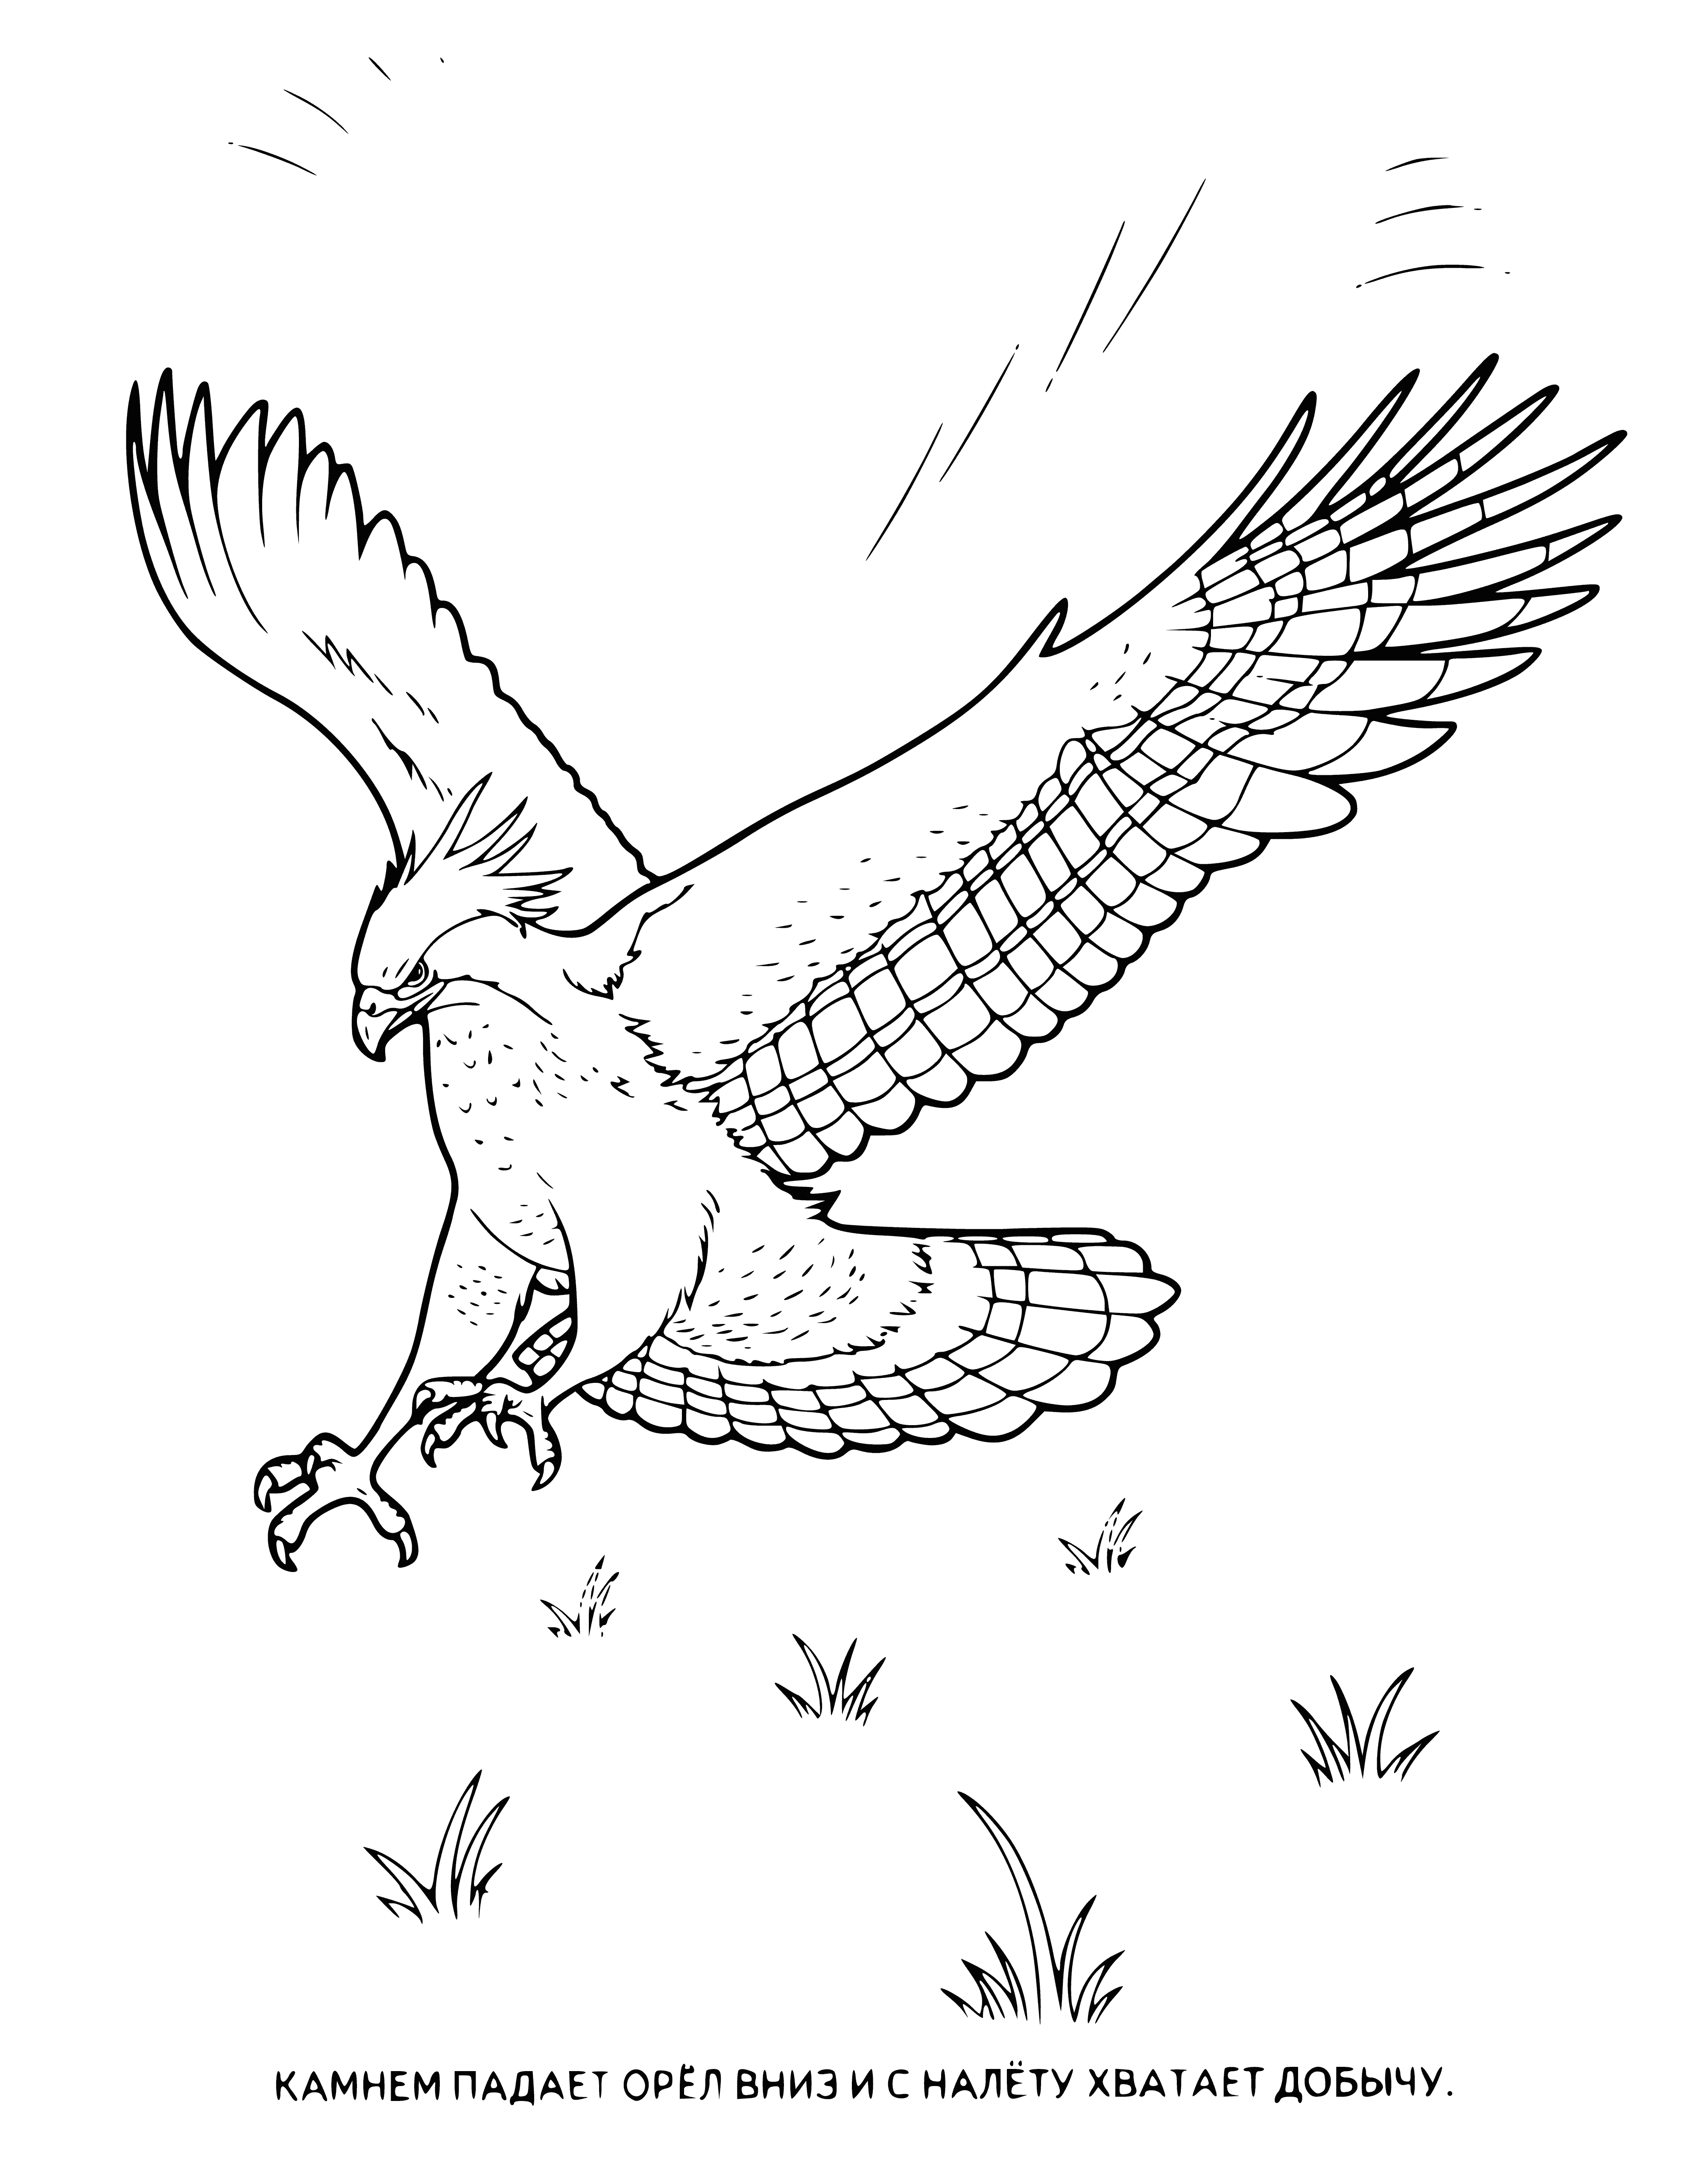 coloring page: The eagle has dark brown body, light brown head, yellow beak, and sharp talons. It flies above water, with mountains and trees in the distance.